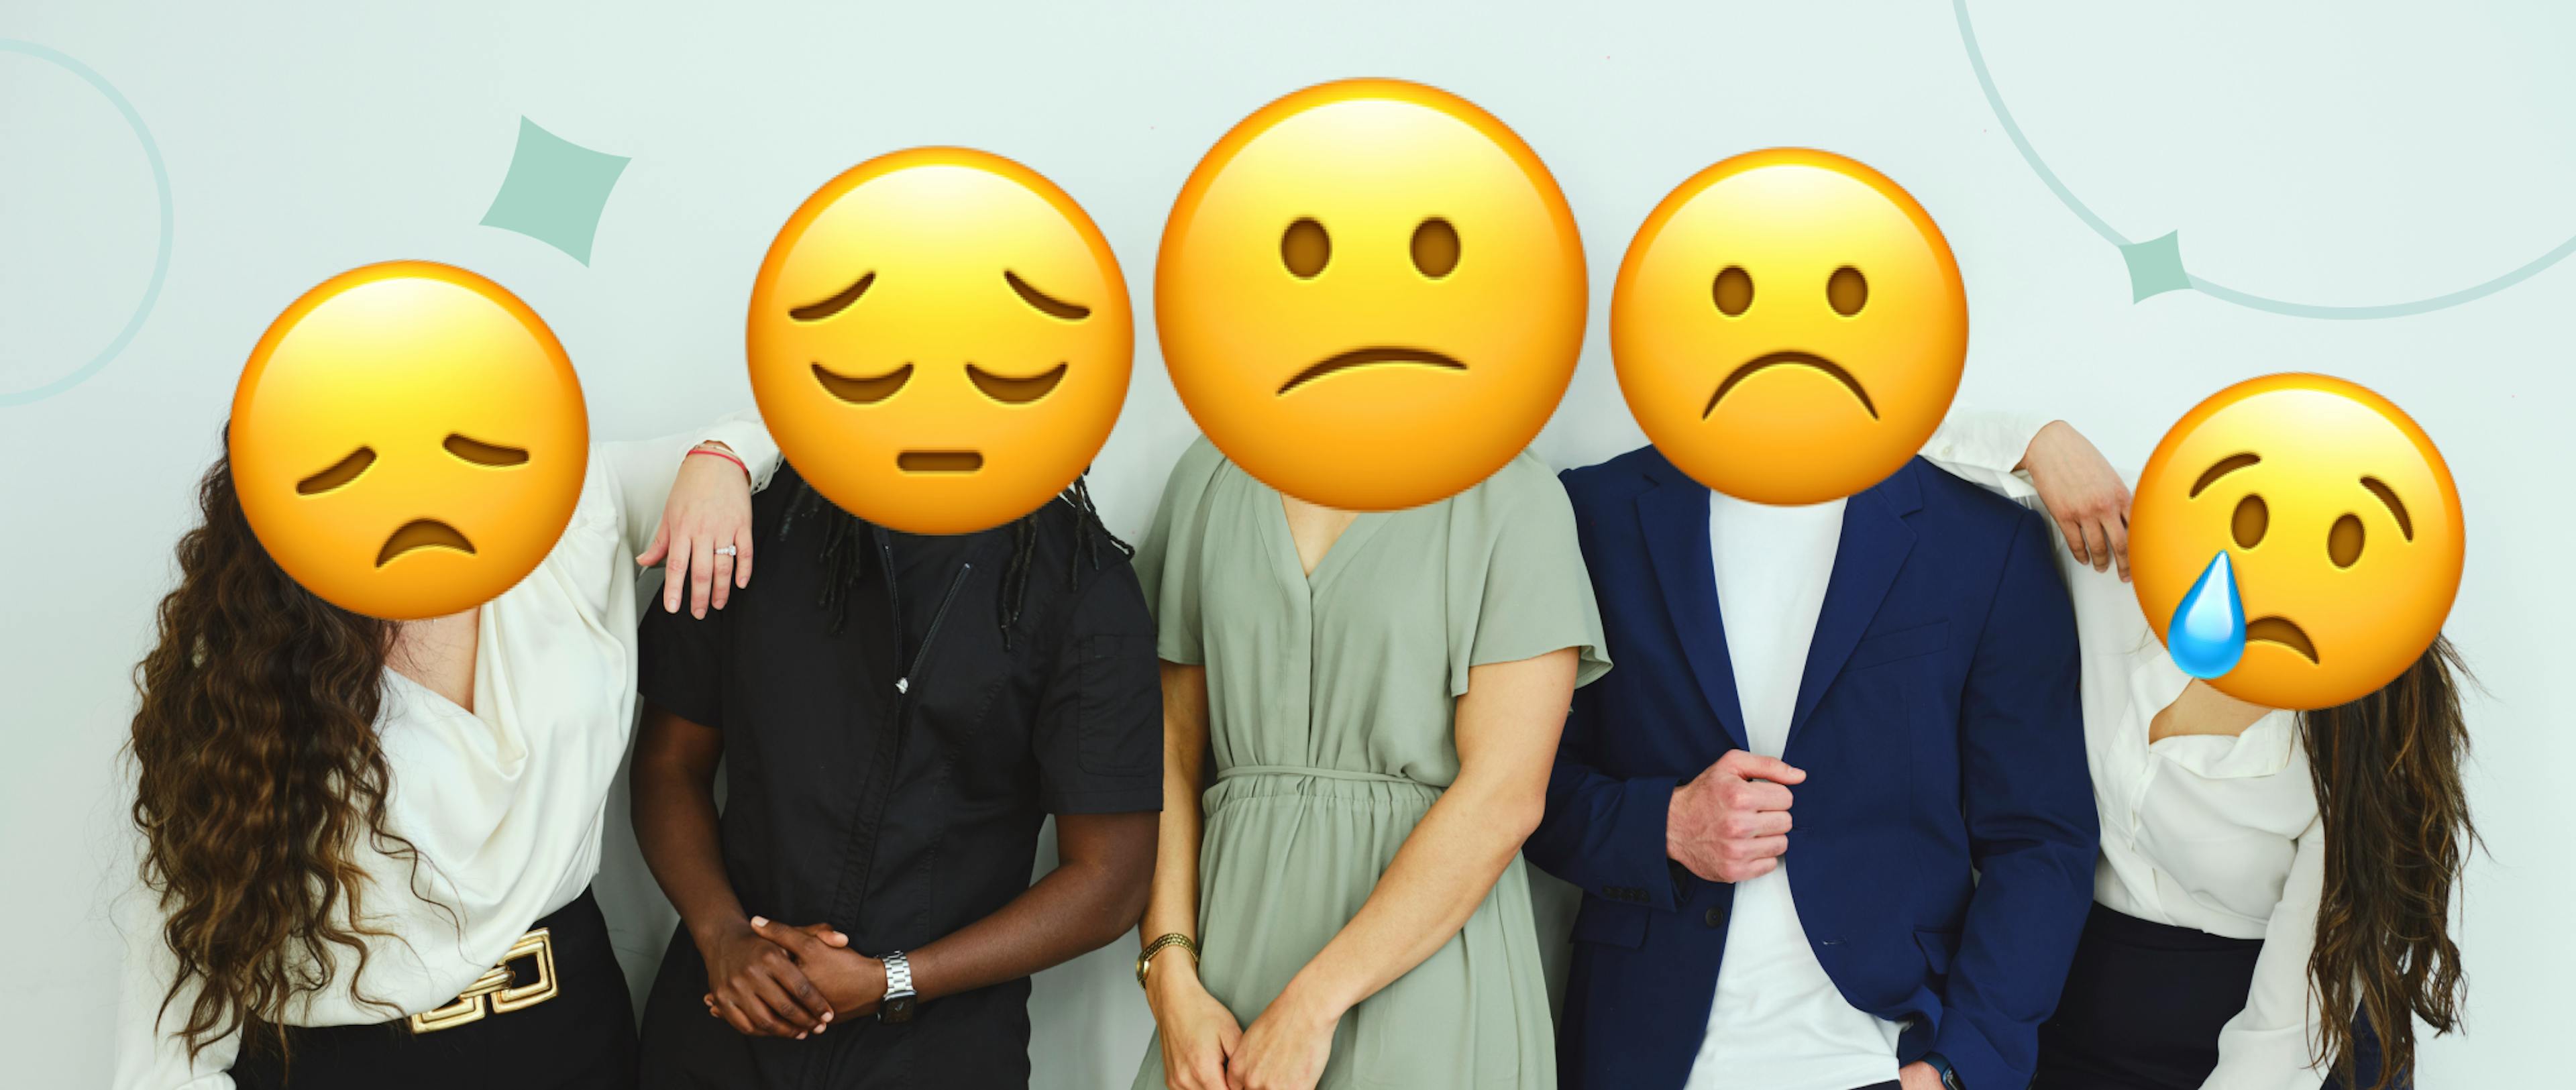 Group of people with sad emoji faces